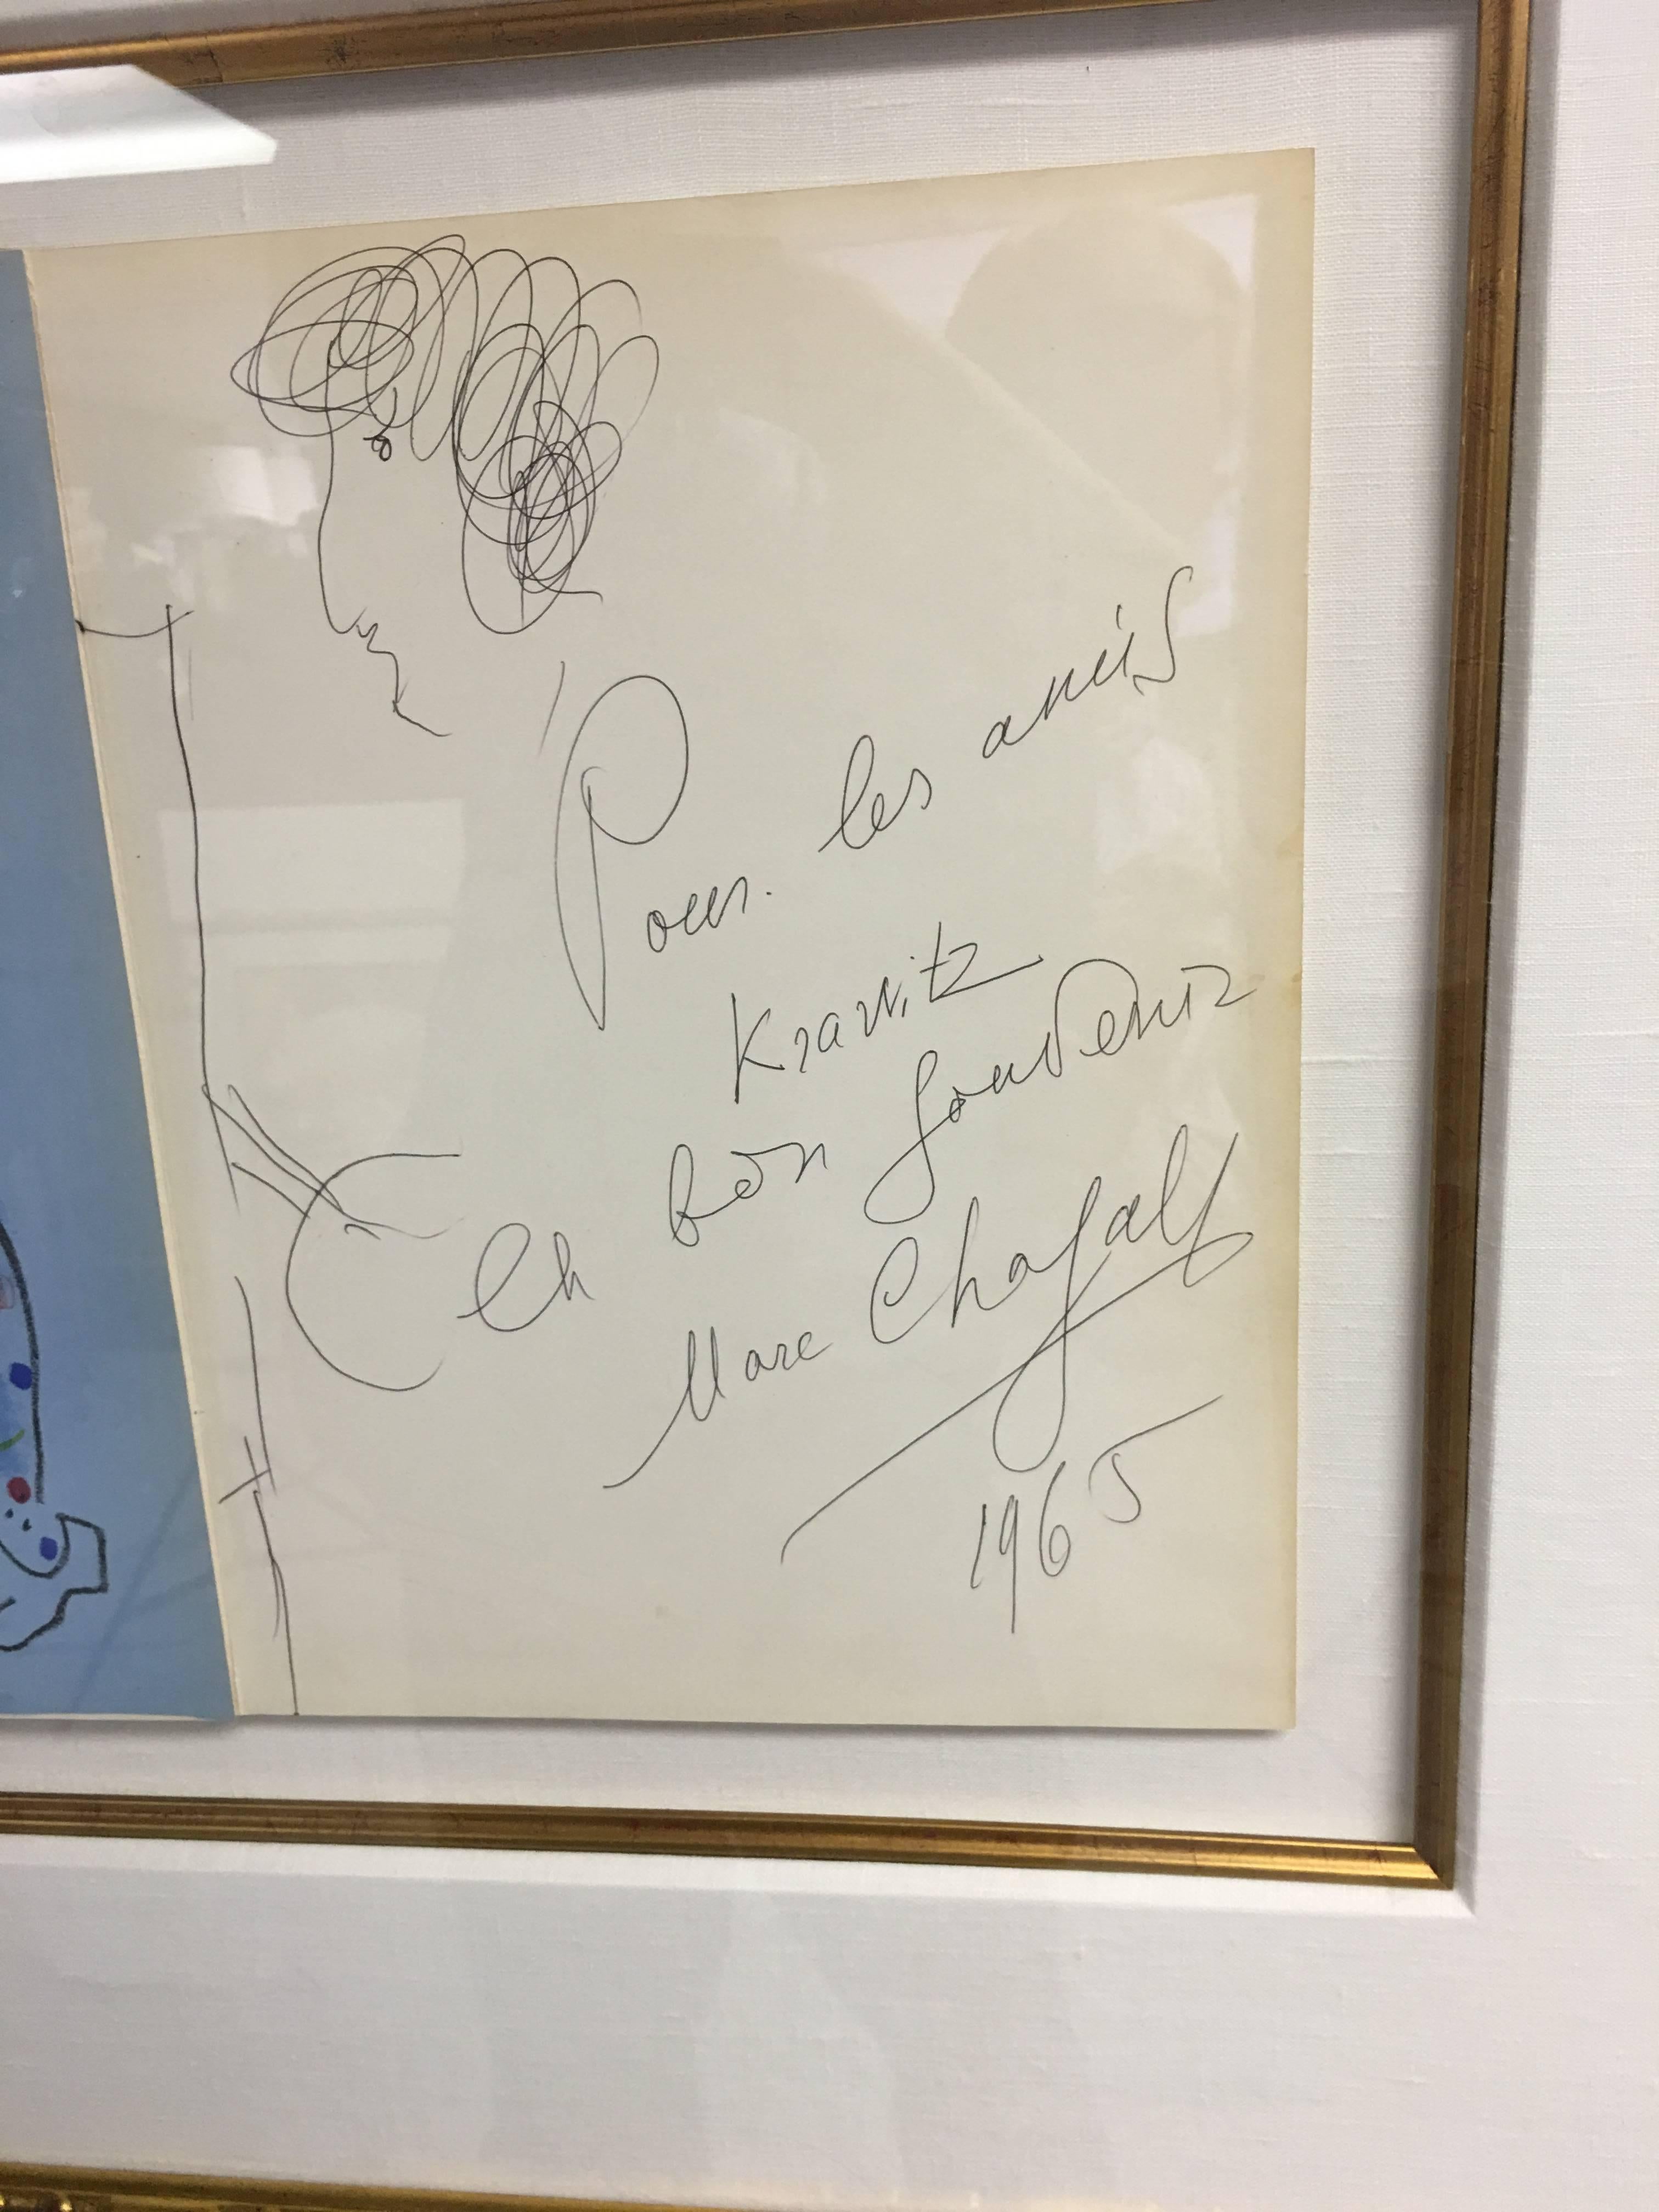 Original artwork by Marc Chagall signed and dated in pen. 1965. Original artwork is on the right and lithograph on the left. Inscription is in French and essentially say to my friends the Kravitz, Marc Chagall, 1965. The artwork on the right shows a